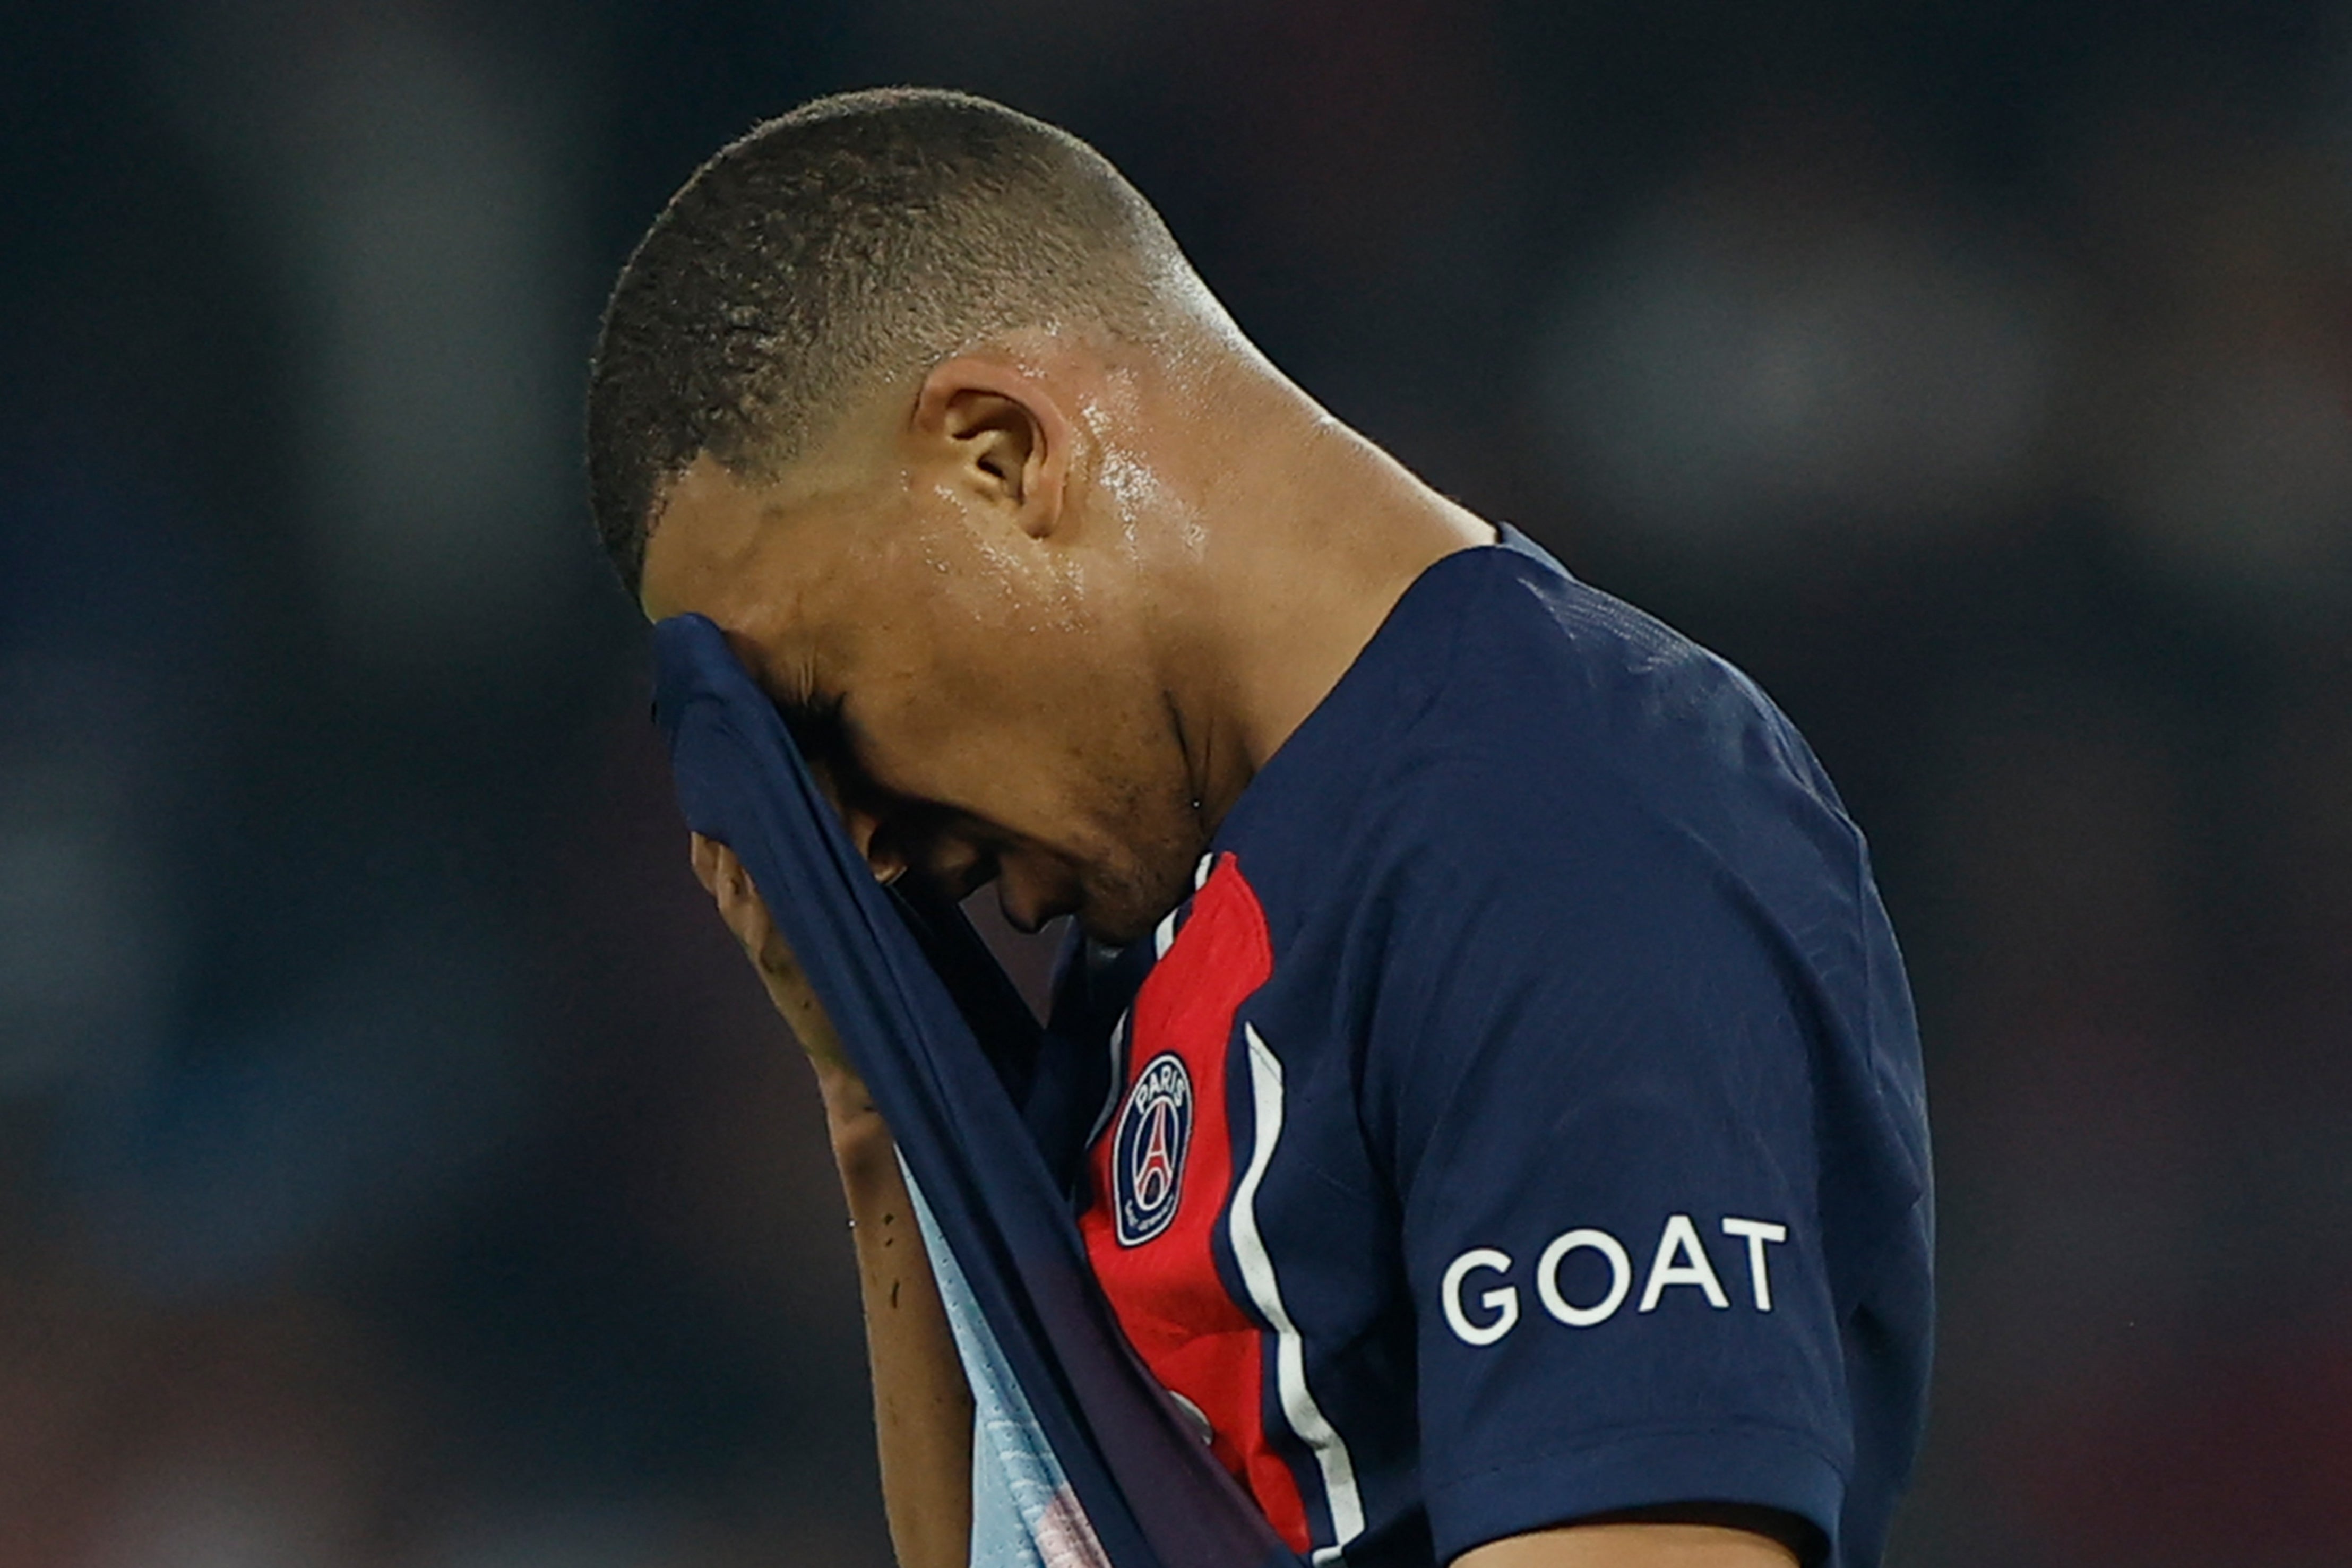 Mbappe will have to reflect on another missed chance with PSG